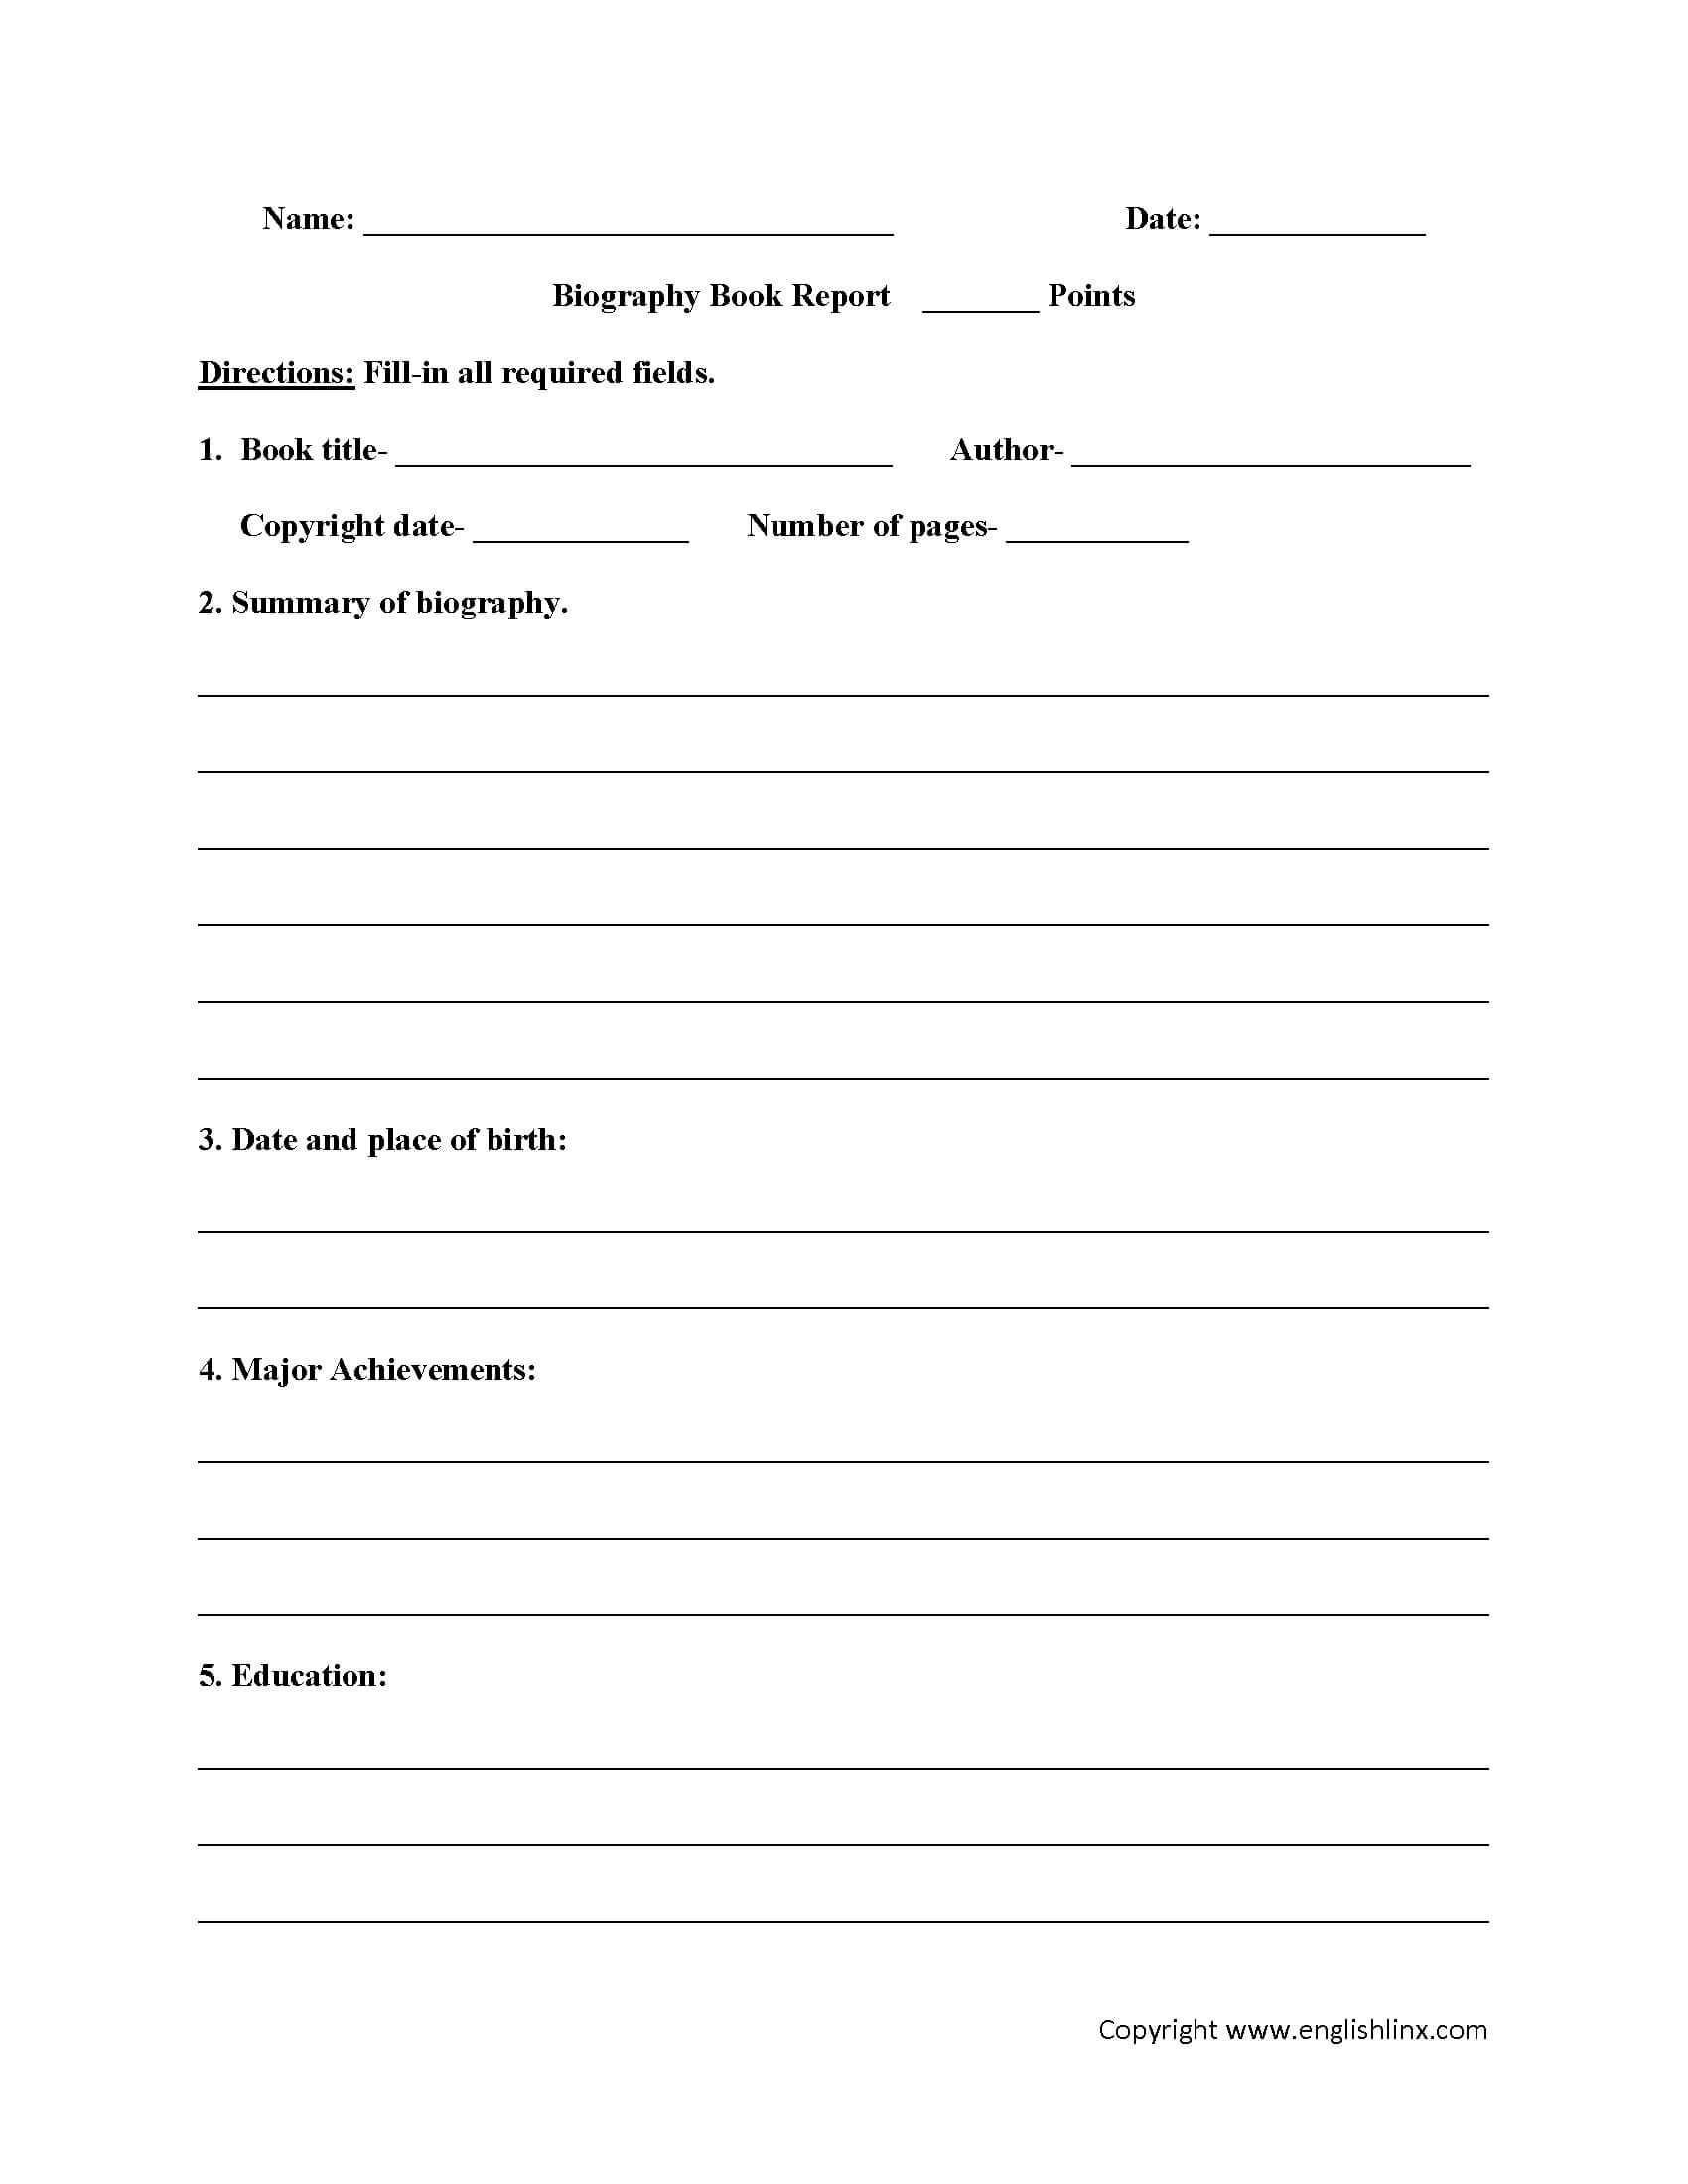 Englishlinx | Book Report Worksheets Inside Biography Book Report Template